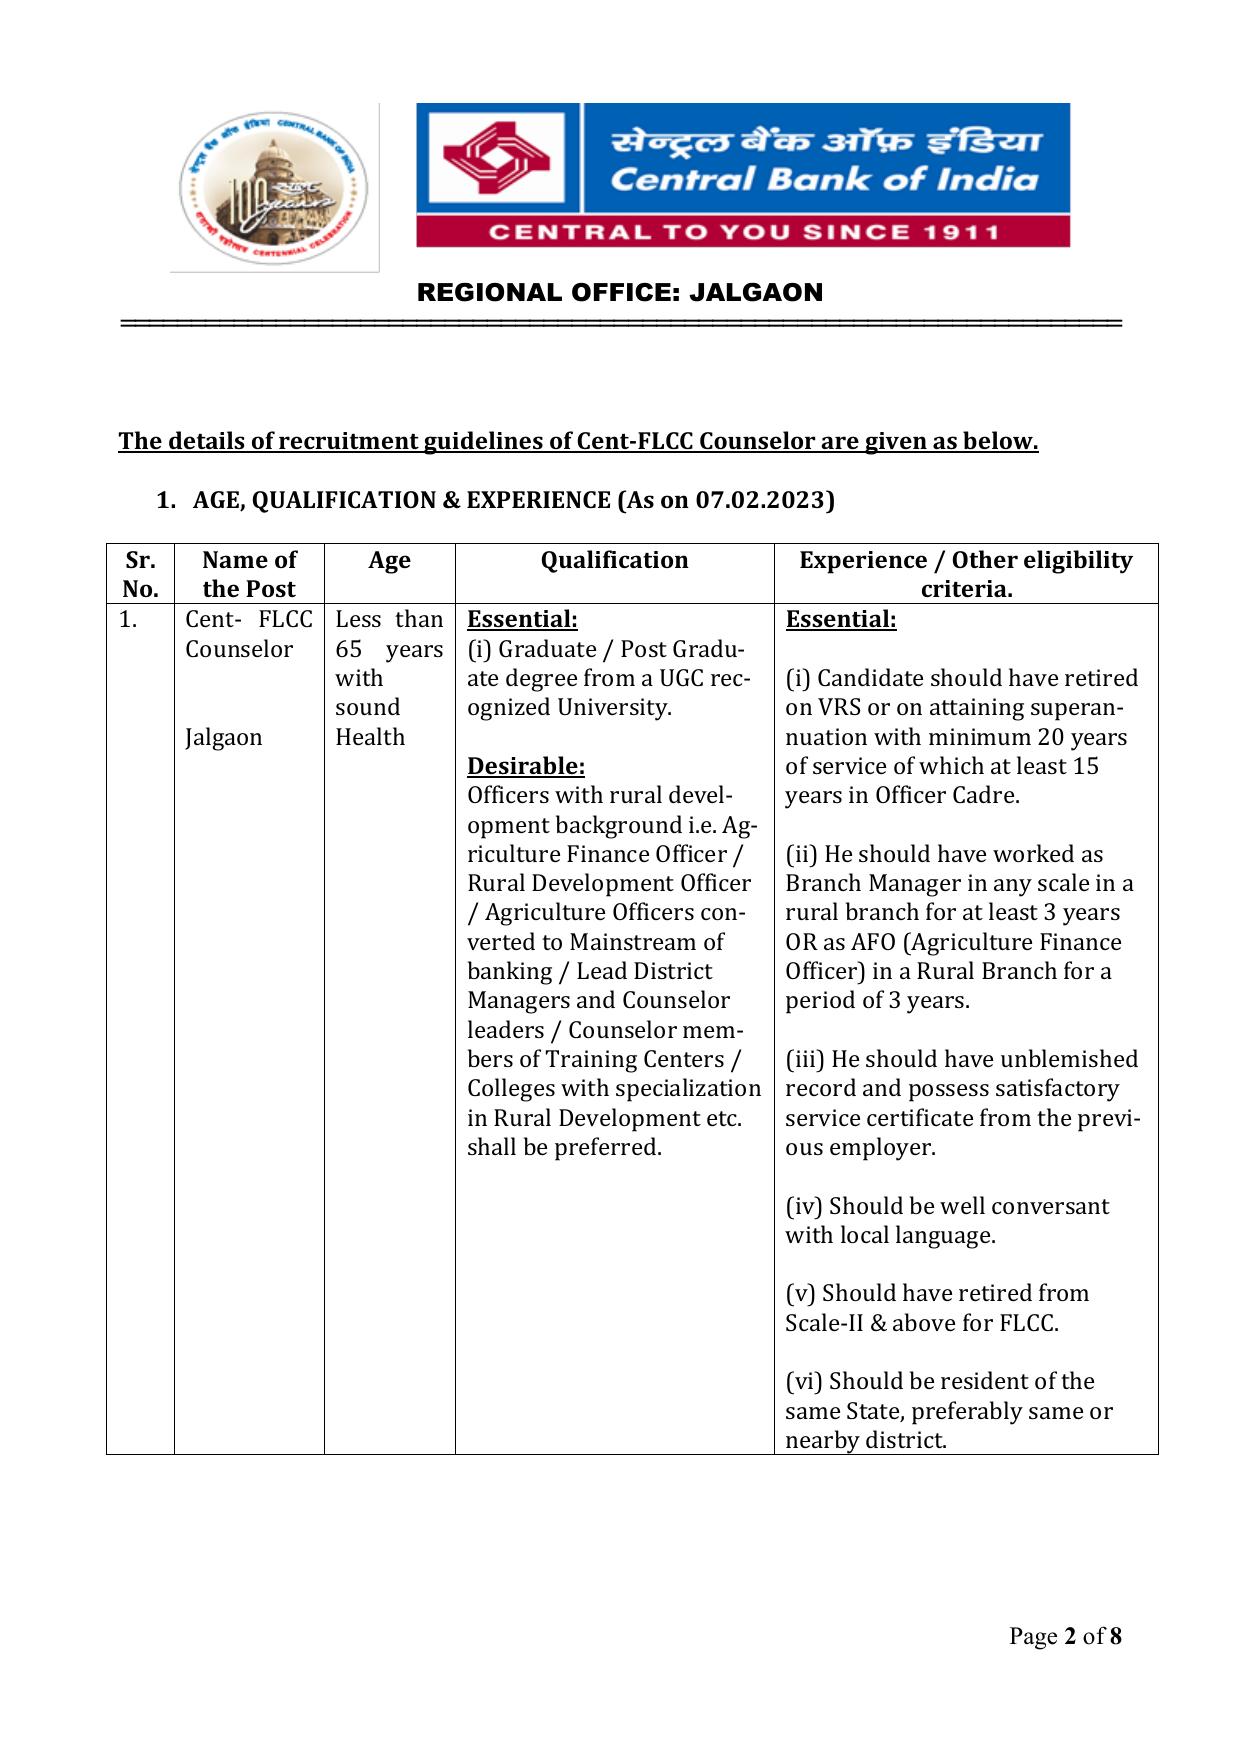 Central Bank of India Jalgaon Invites Application for FLCC Counselor Recruitment 2023 - Page 2